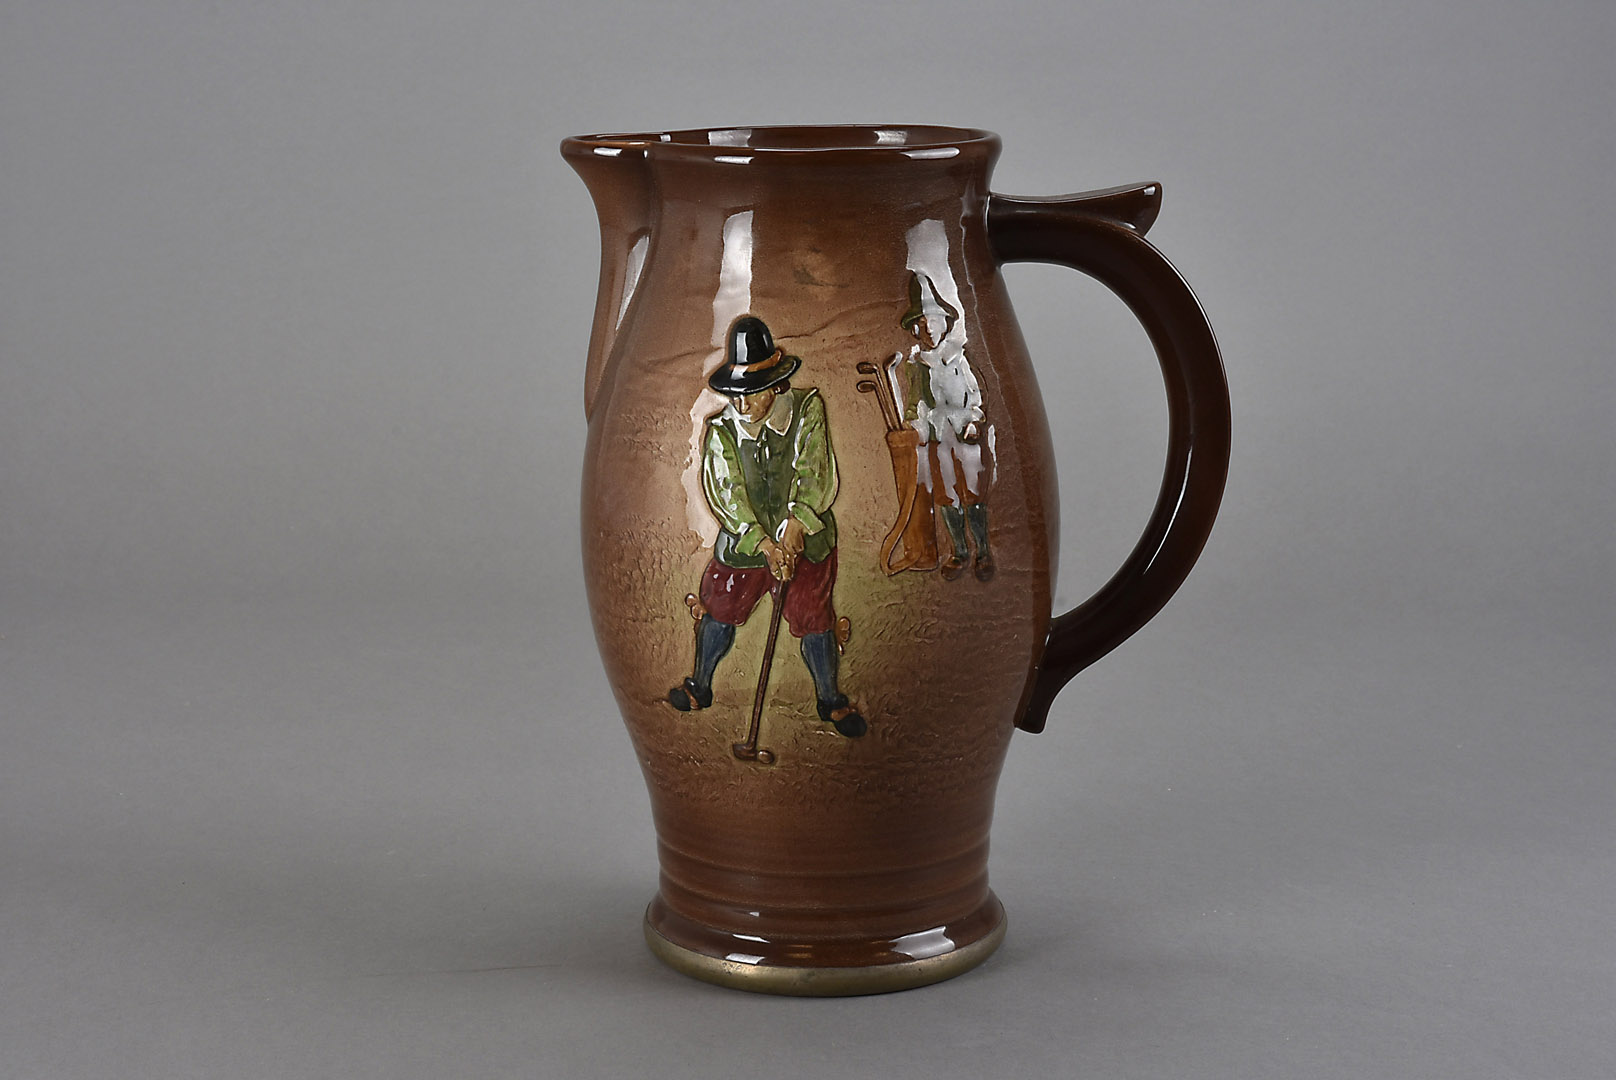 A Royal Doulton Golfing jug, moulded in low relief with figures playing golf, with silver foot rim